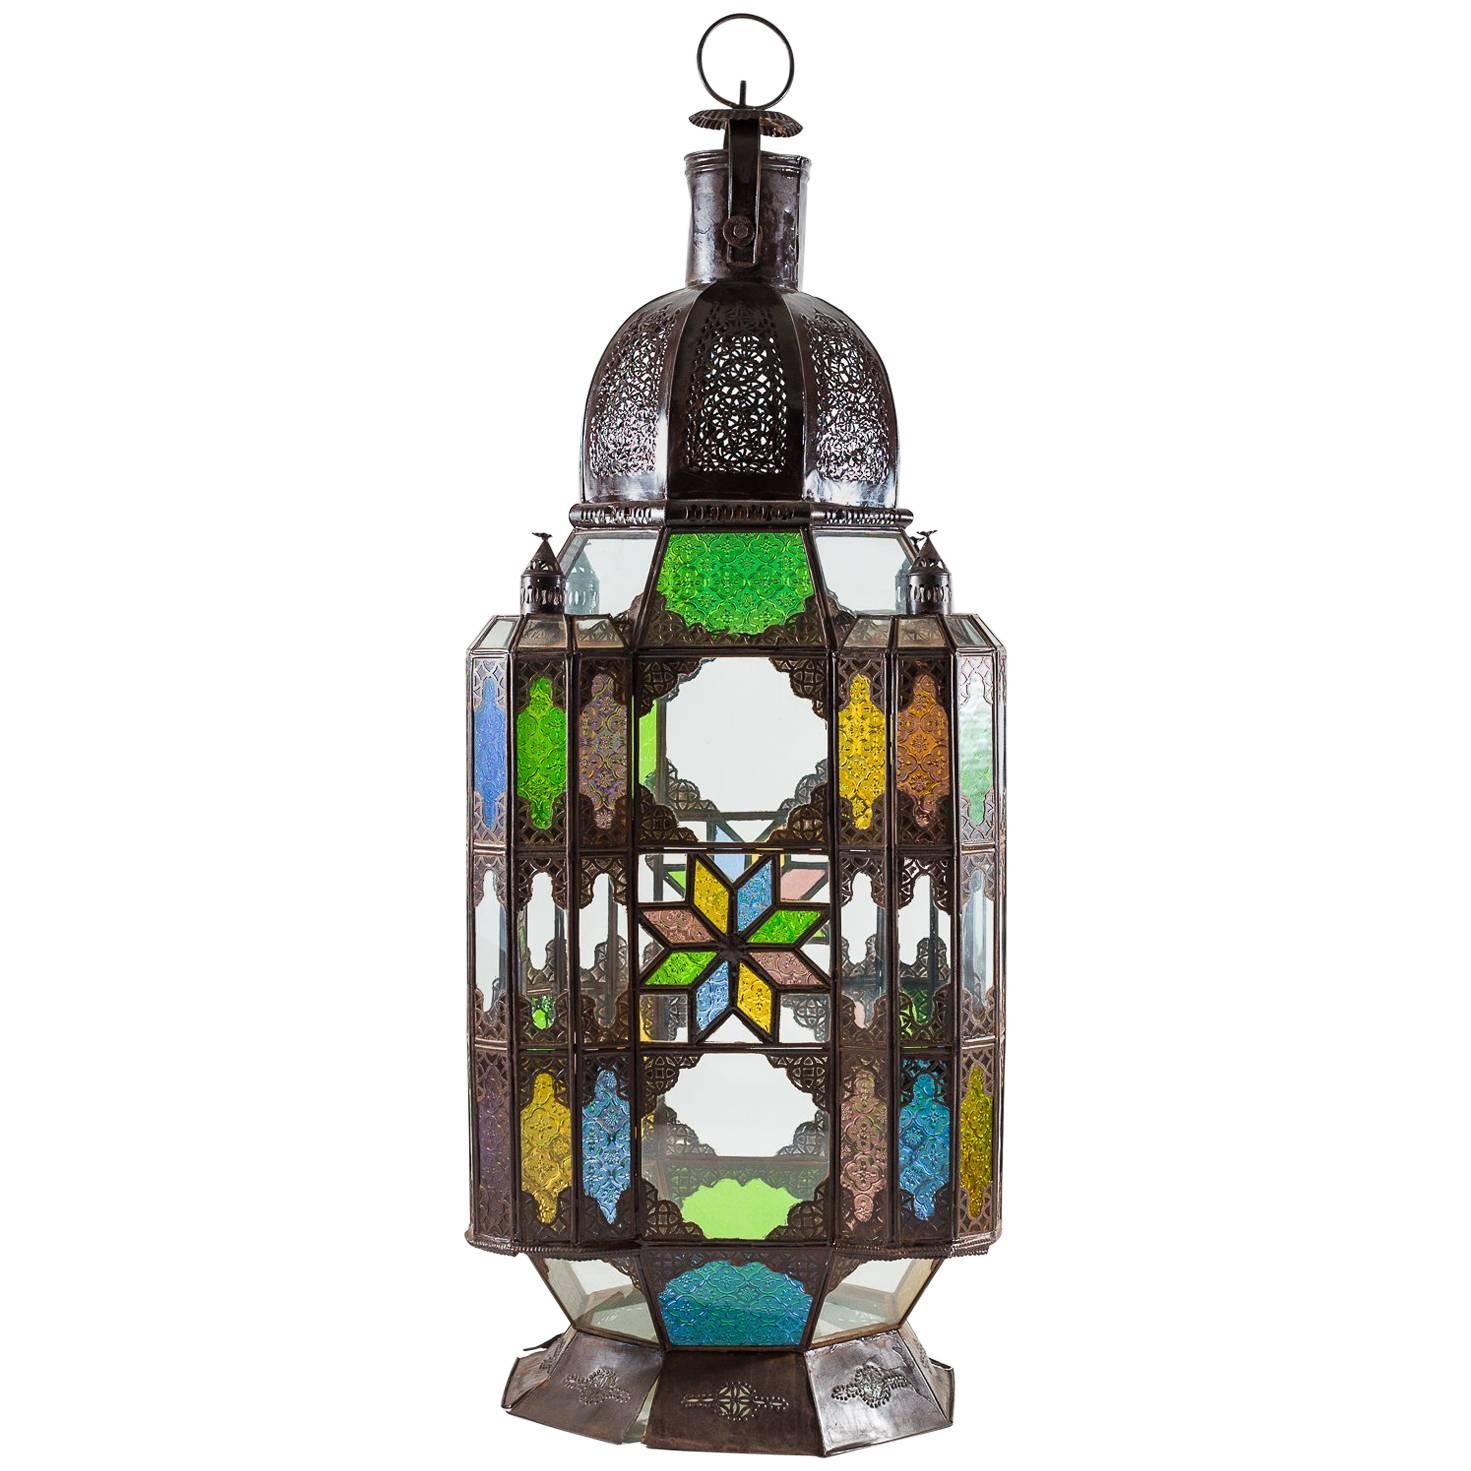 Hand Crafted Moroccan Lantern with Colored Panes